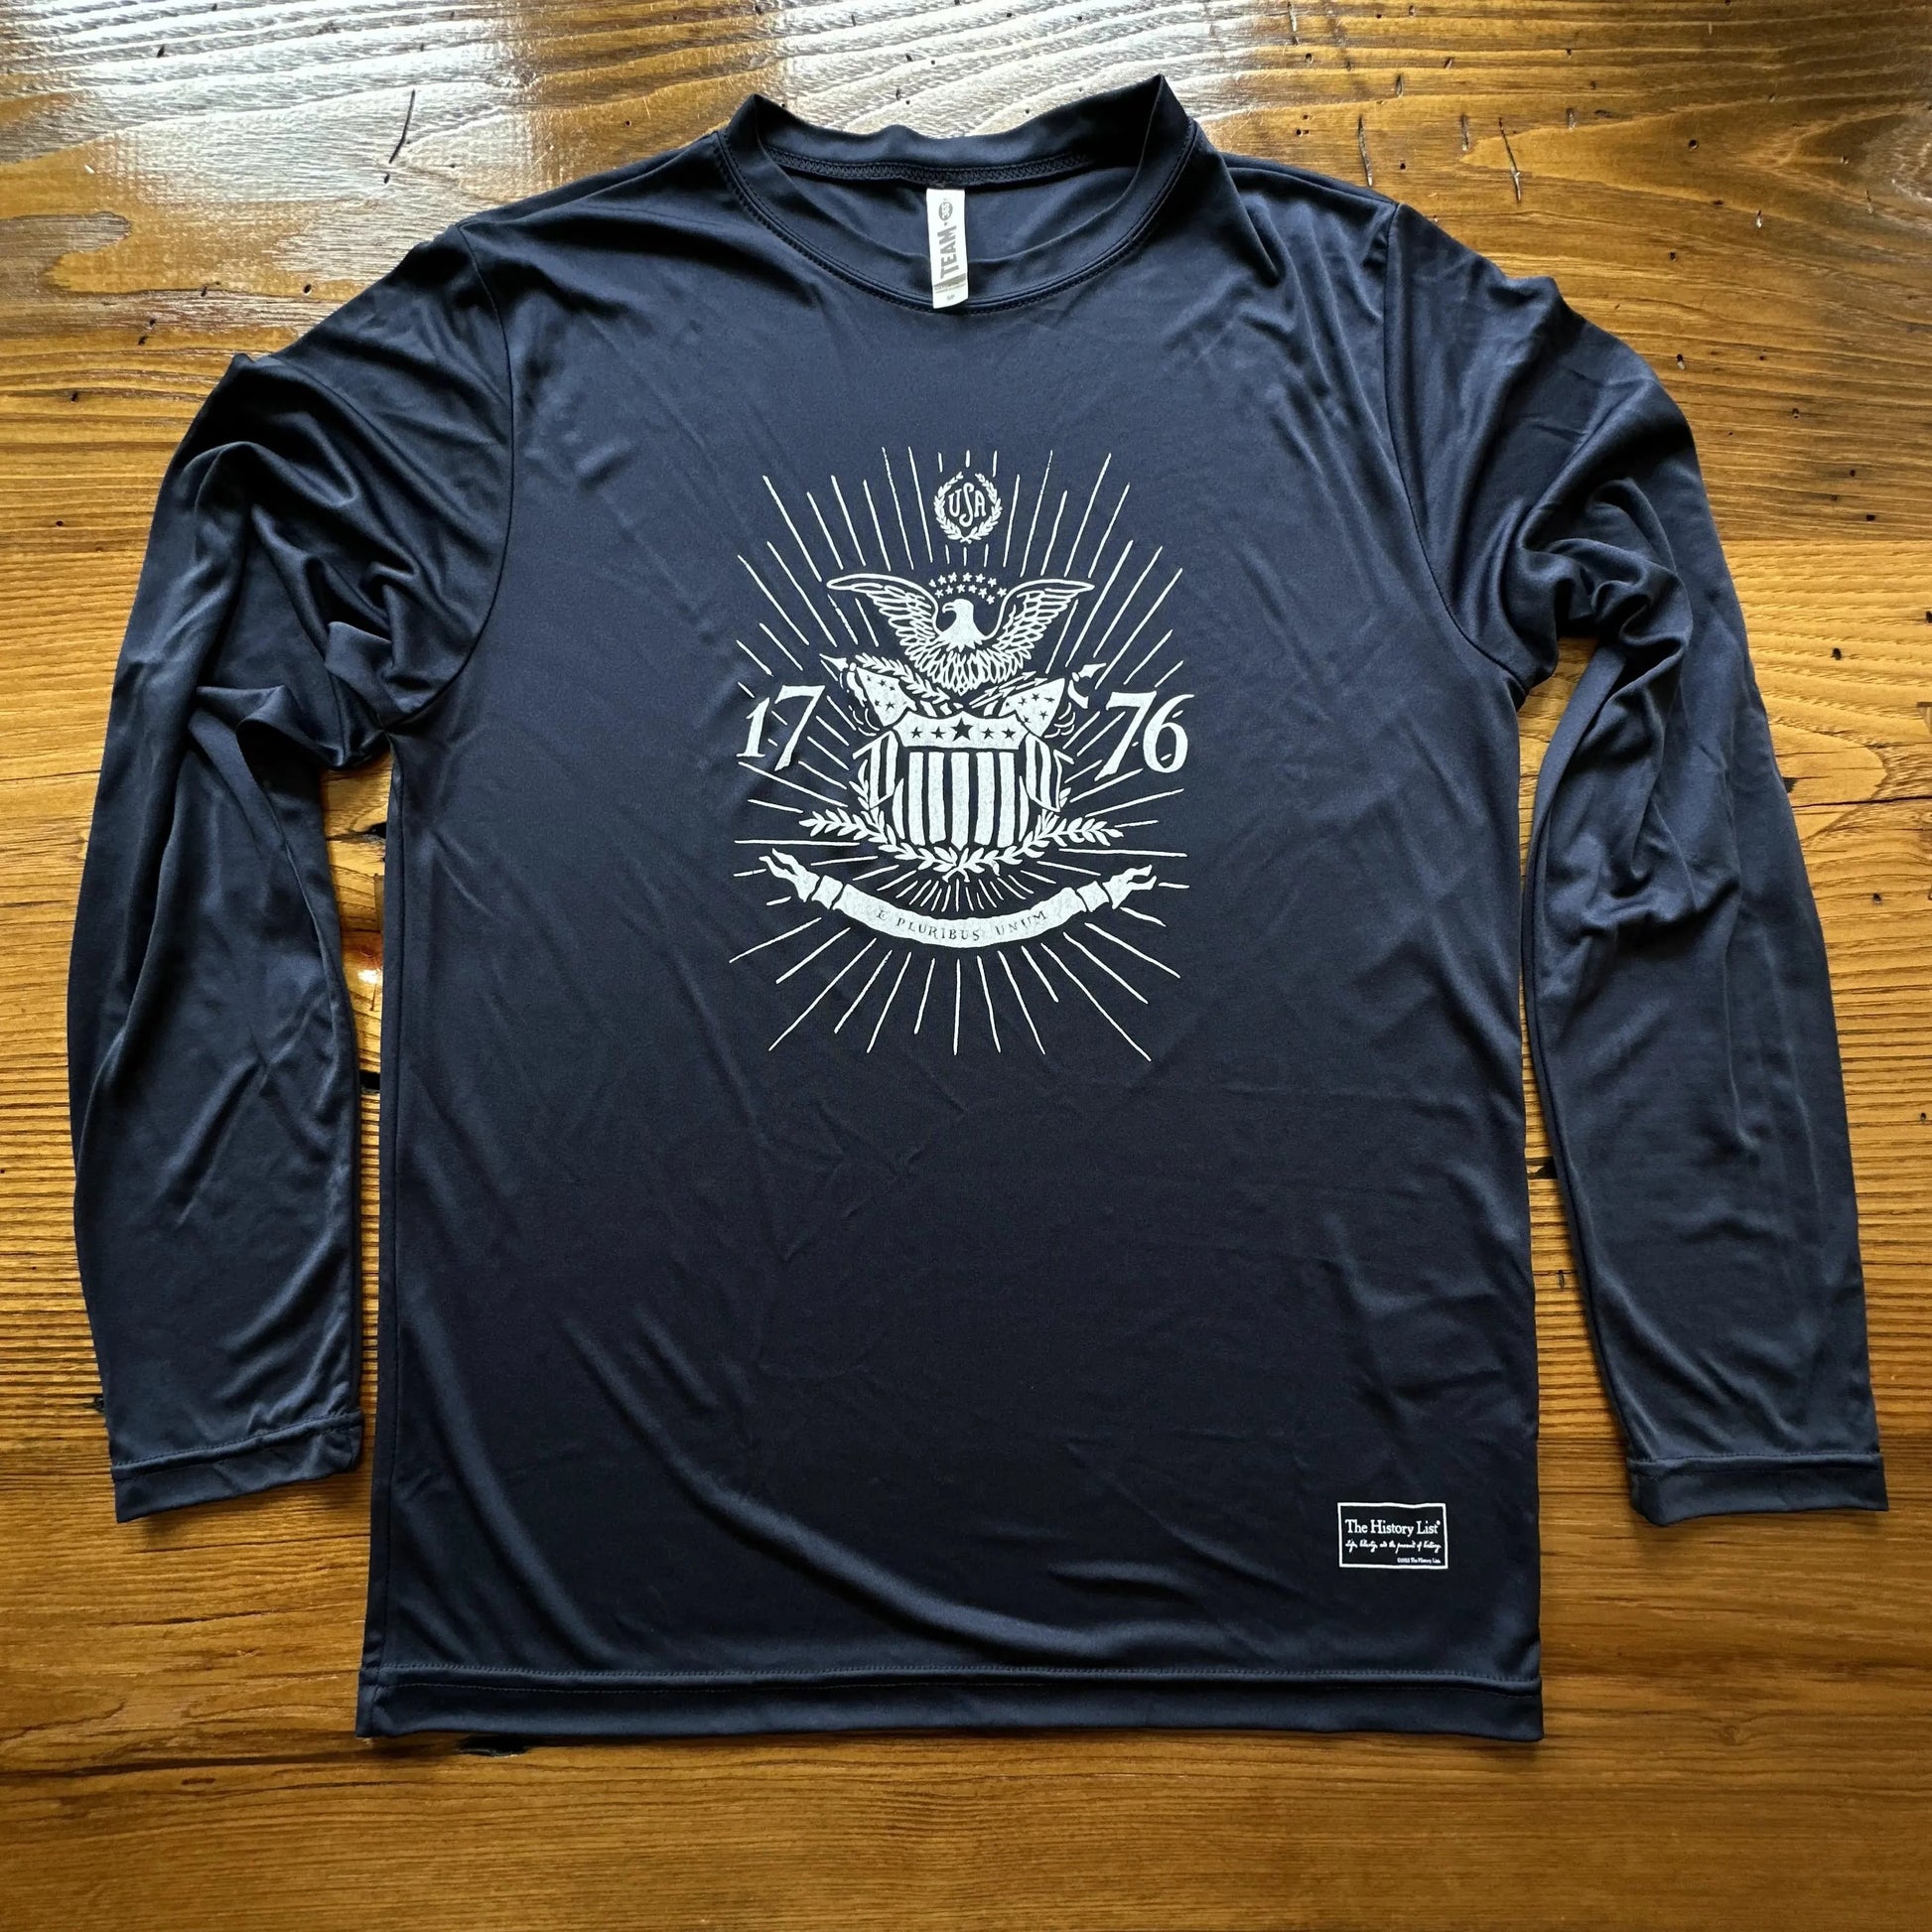 Fourth of July Shirt | 1776 On UV Protection - Long-Sleeved Shirt Women's Cut / 2XL